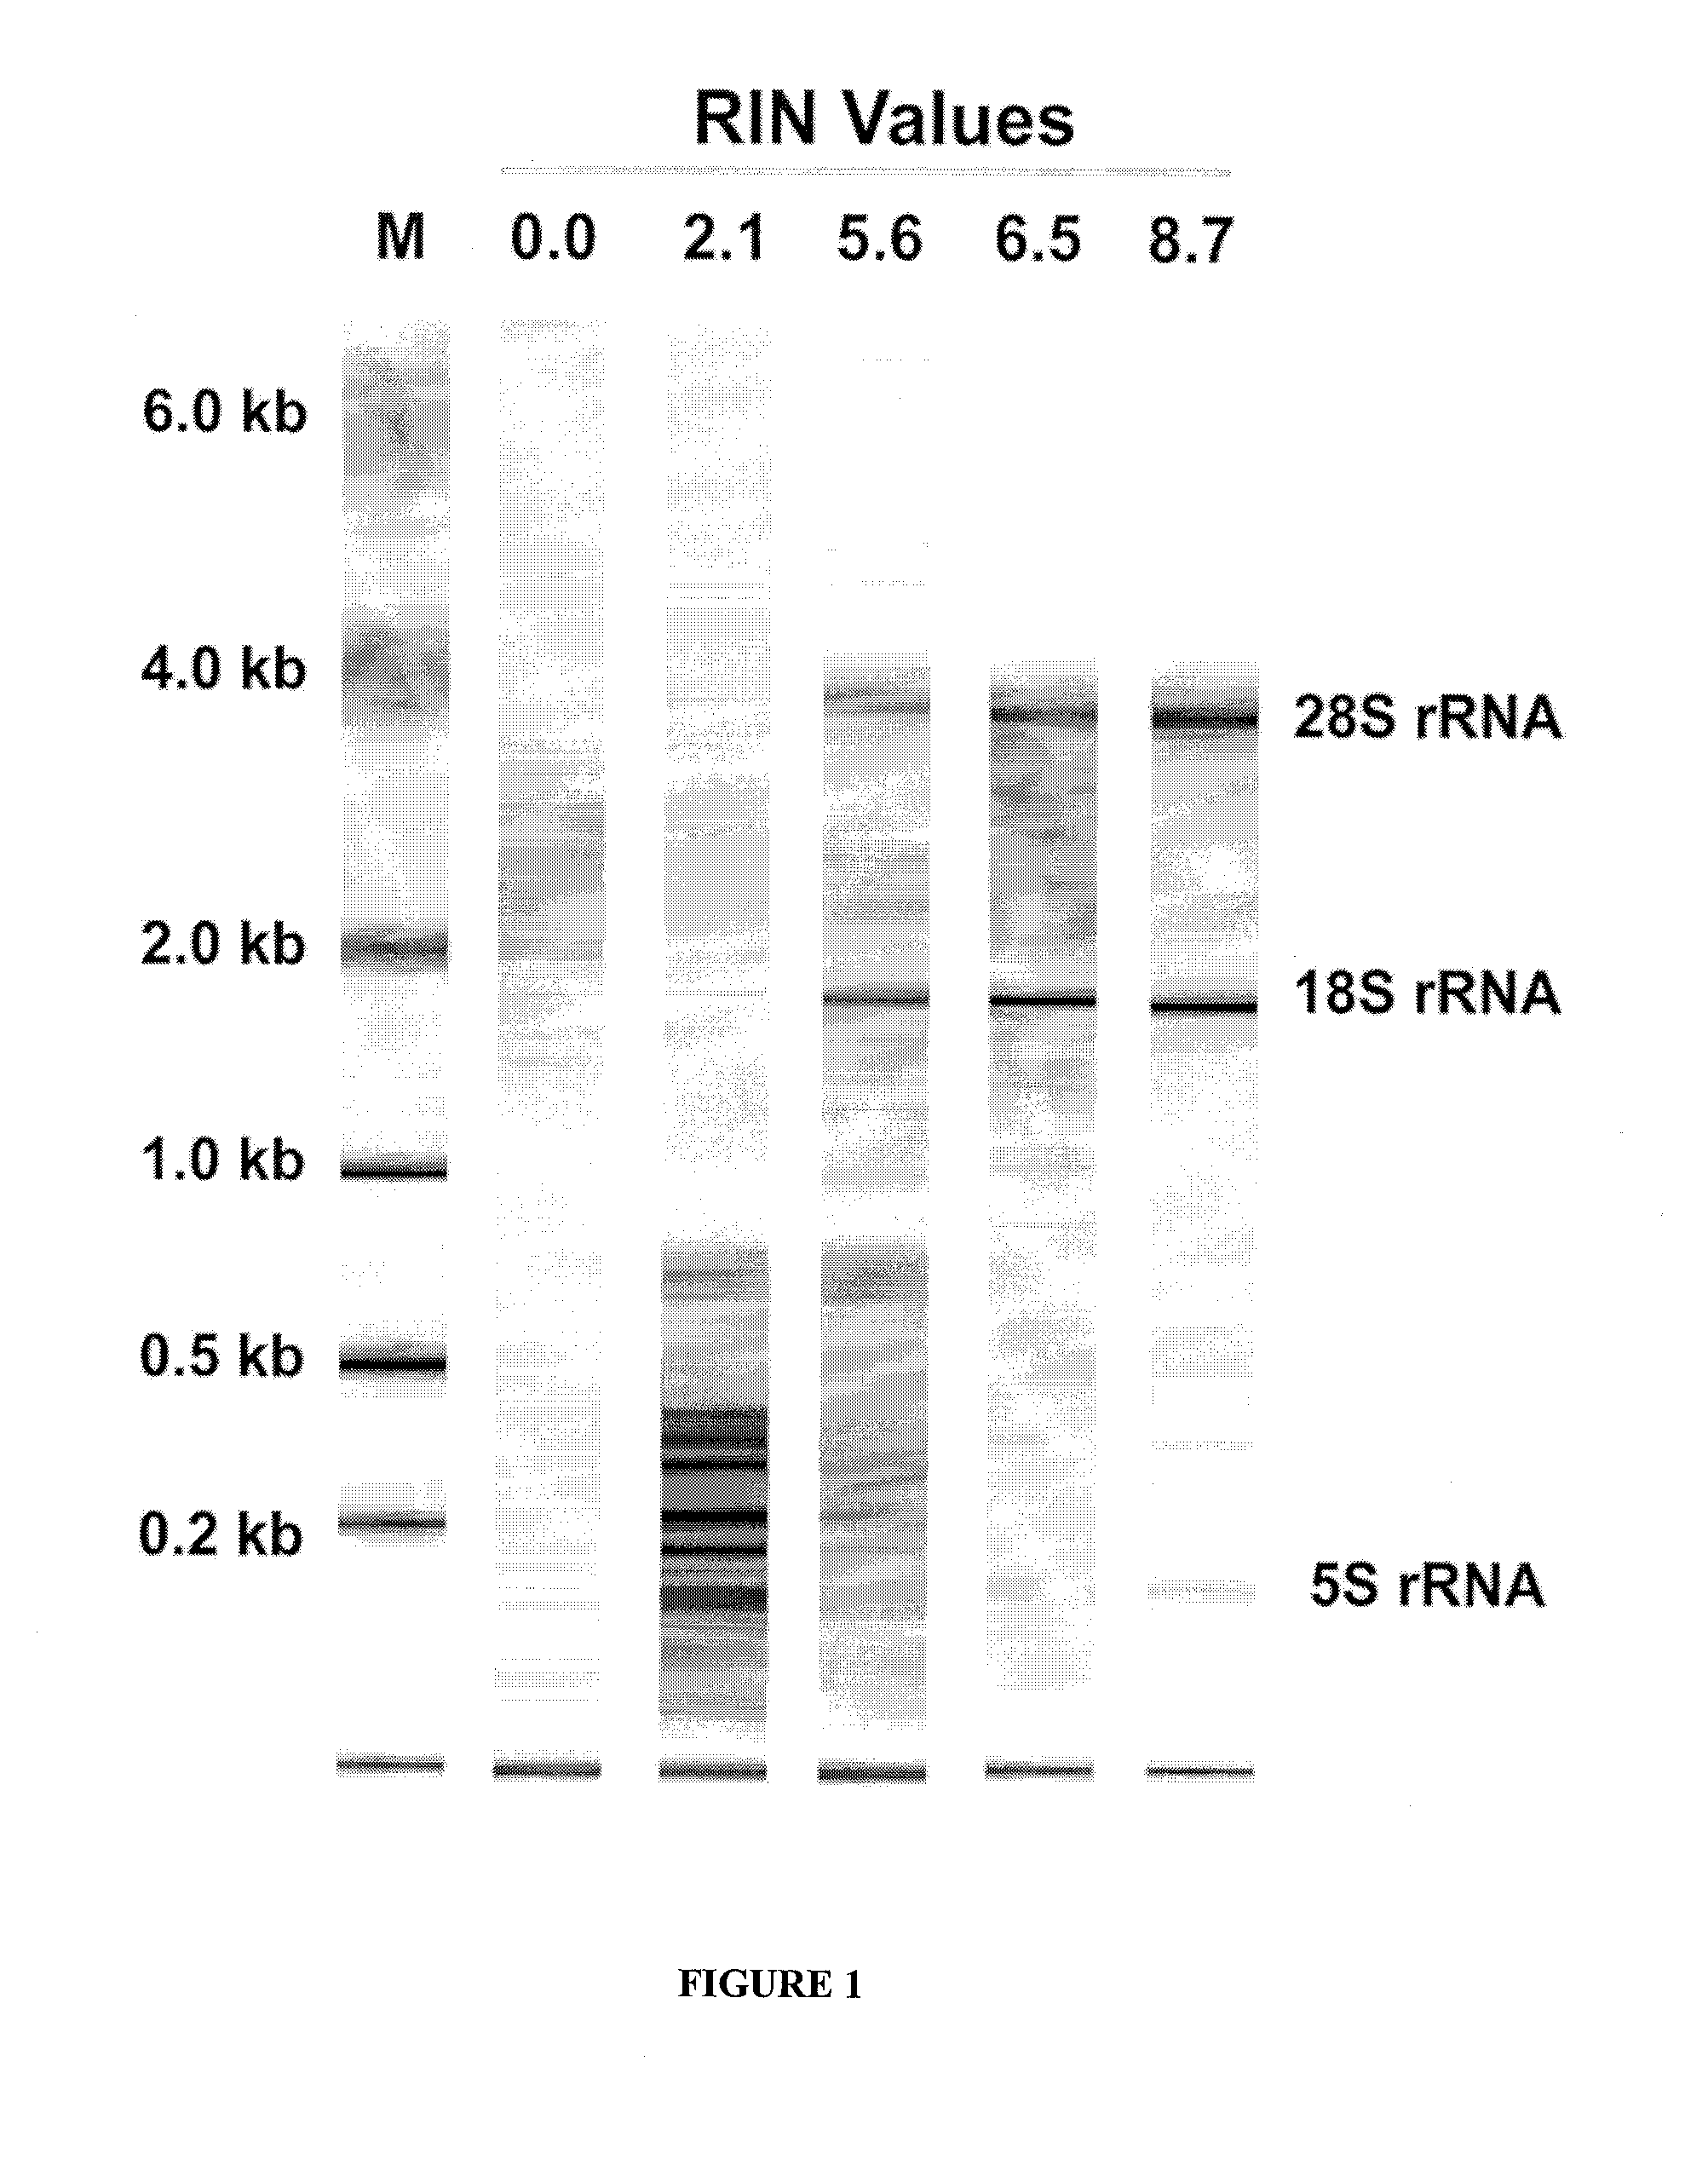 Method of using tumour RNA integrity to measure response to chemotherapy in cancer patients